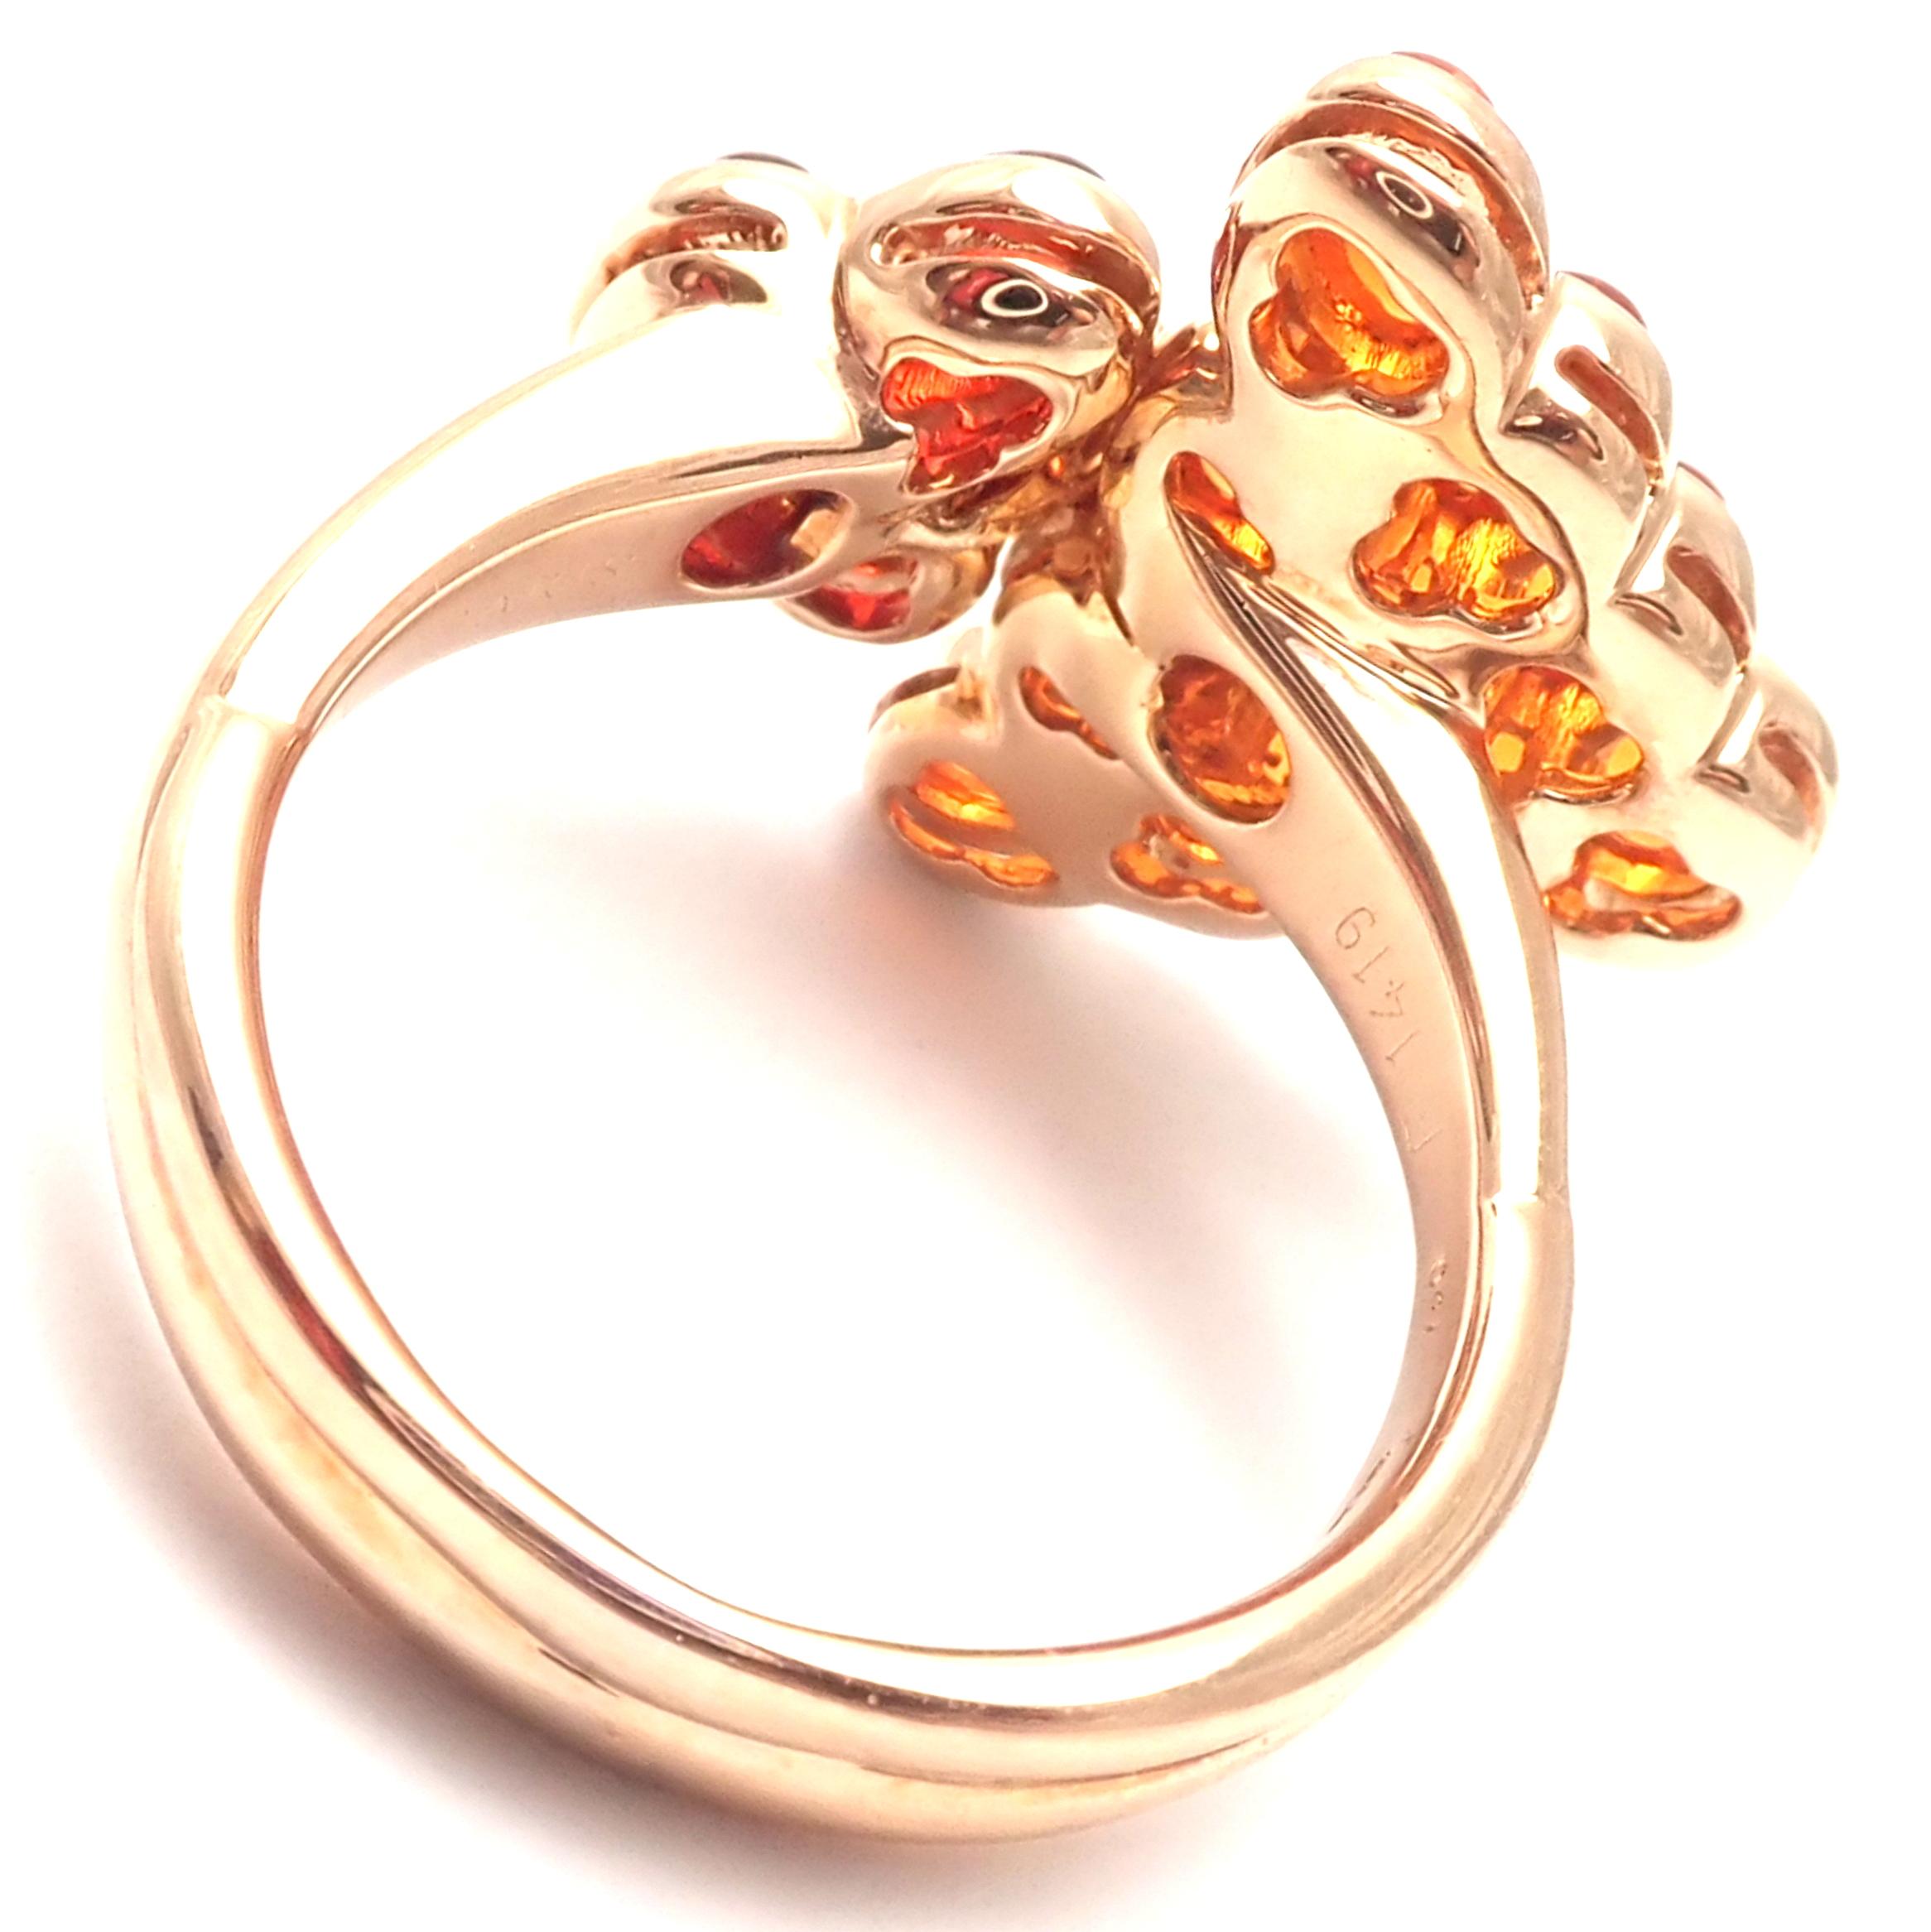 Mauboussin Paris Diamond Tourmaline Citrine Rose Gold Ring In Excellent Condition For Sale In Holland, PA